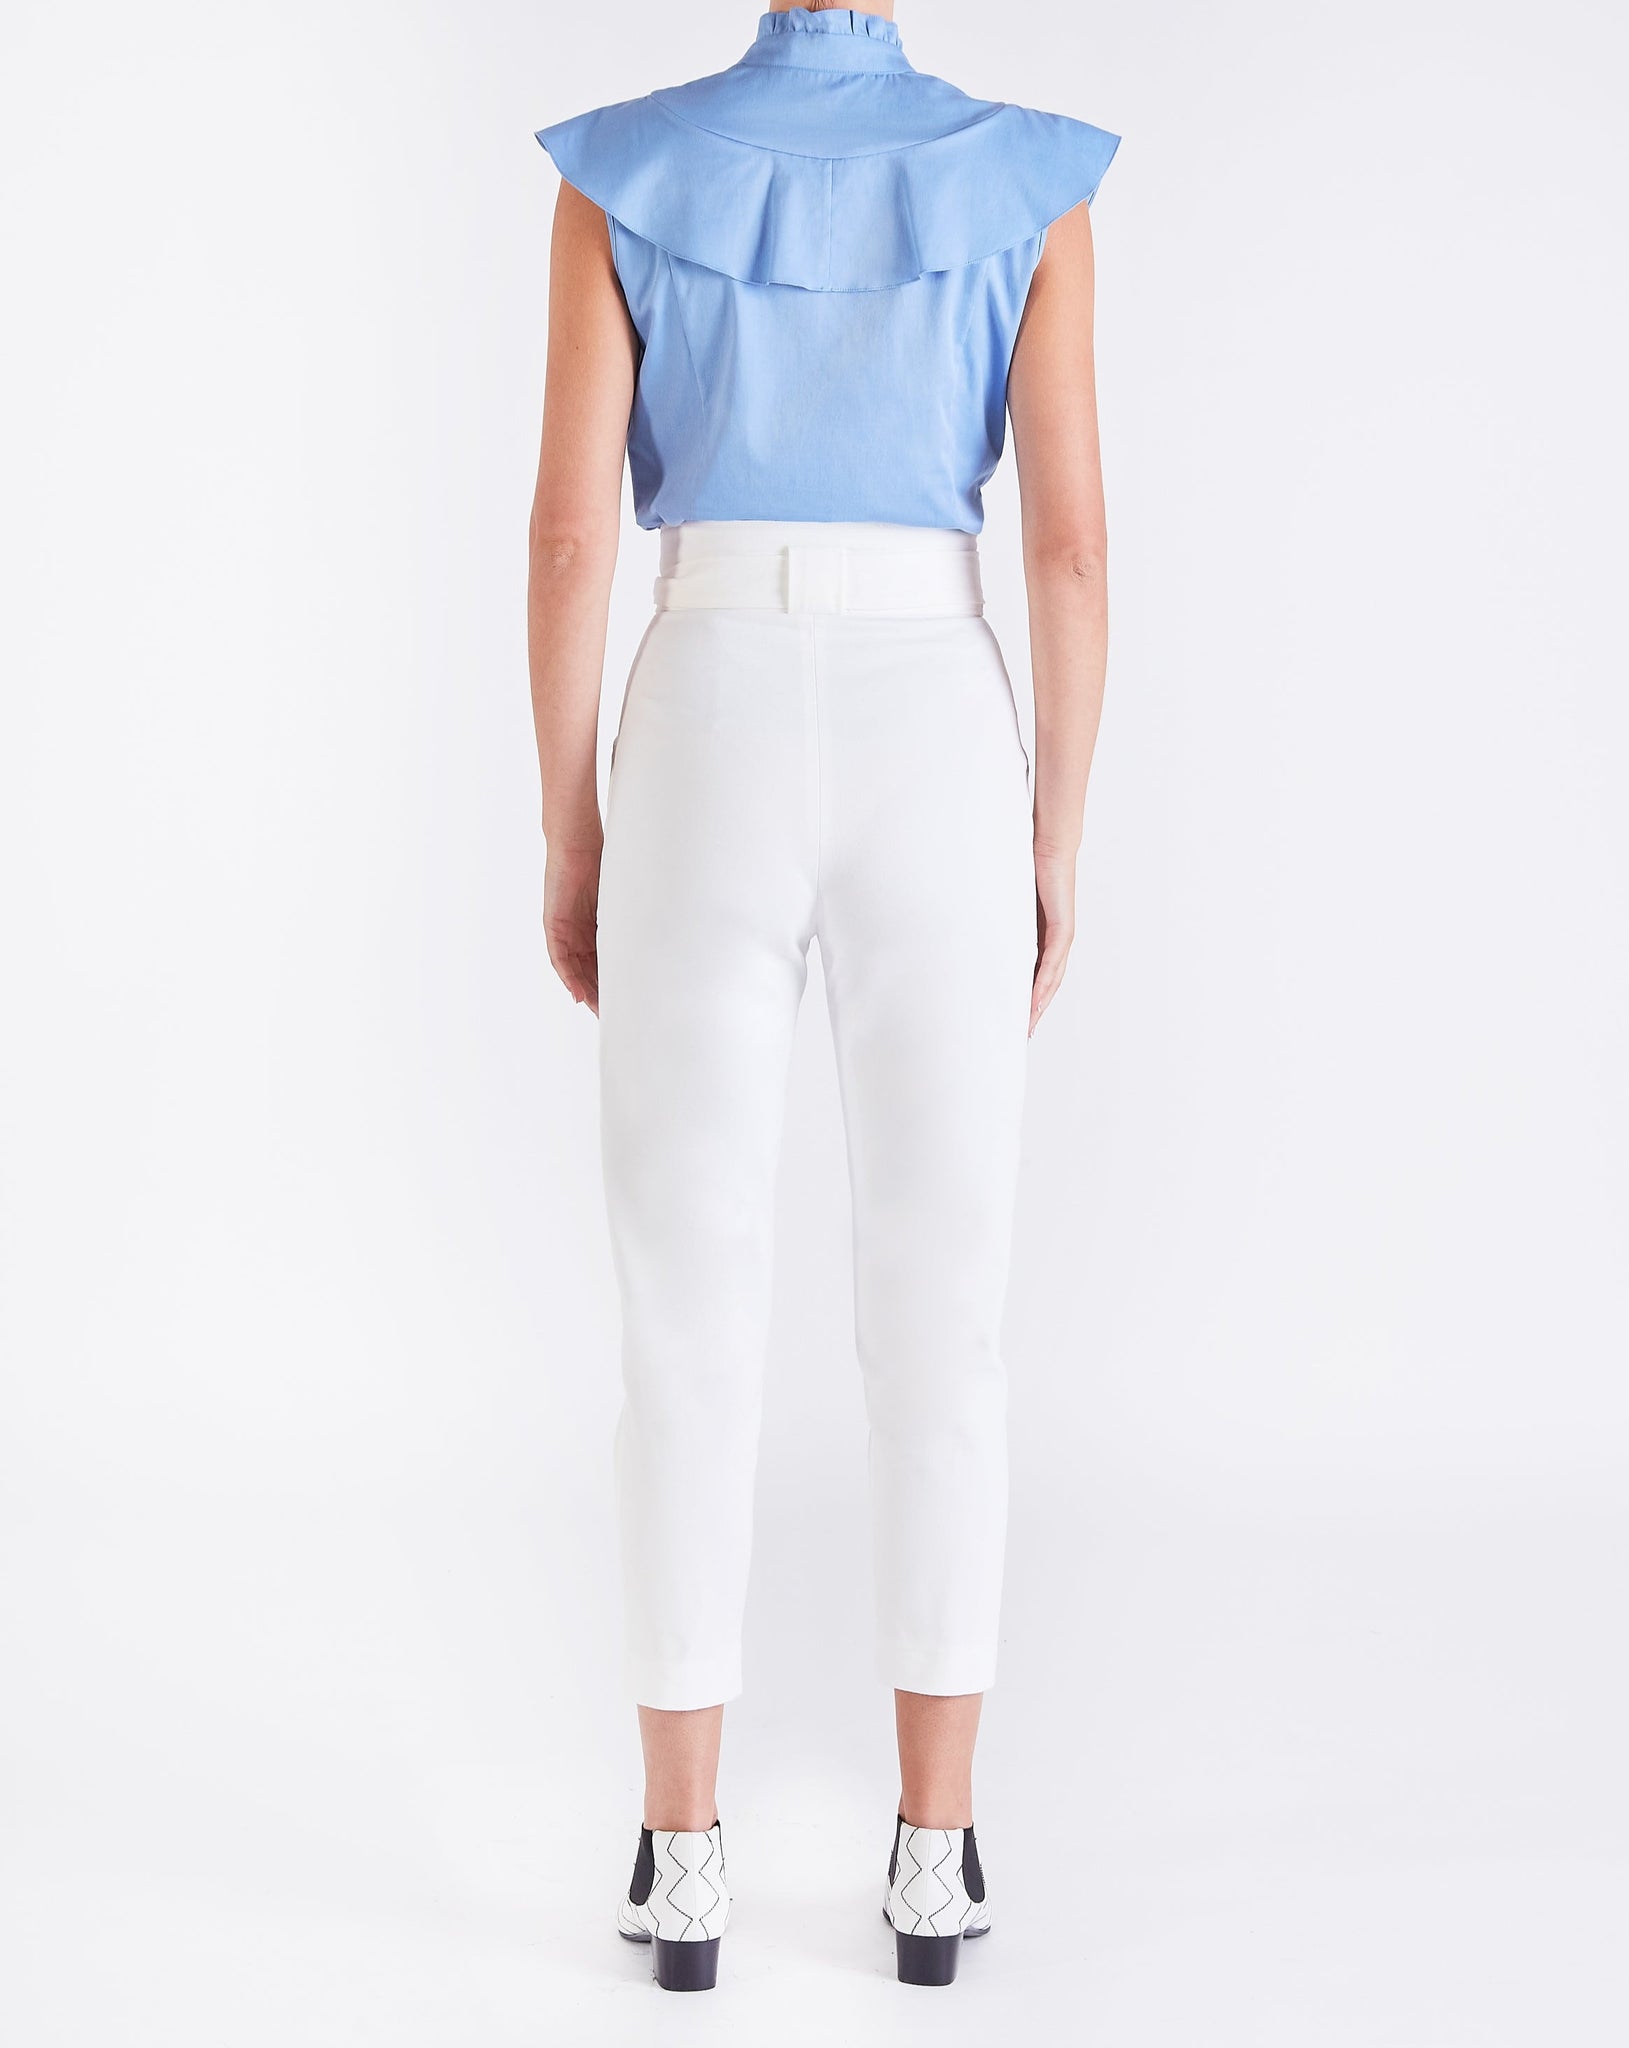 Val UTILITY BELTED PEG TROUSERS - OFF WHITE